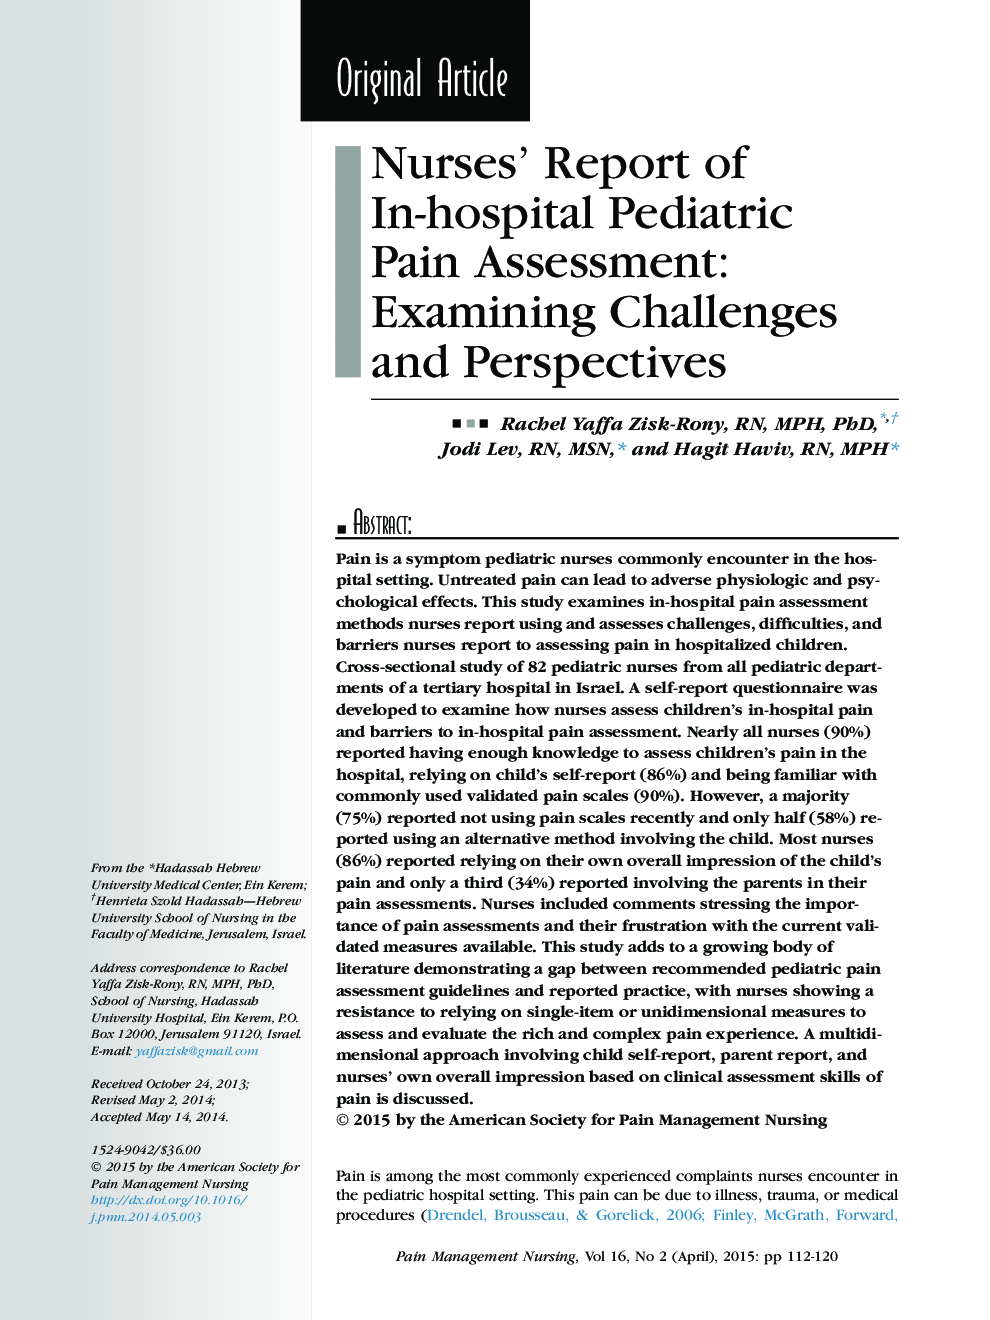 Nurses' Report of In-hospital Pediatric Pain Assessment: Examining Challenges and Perspectives